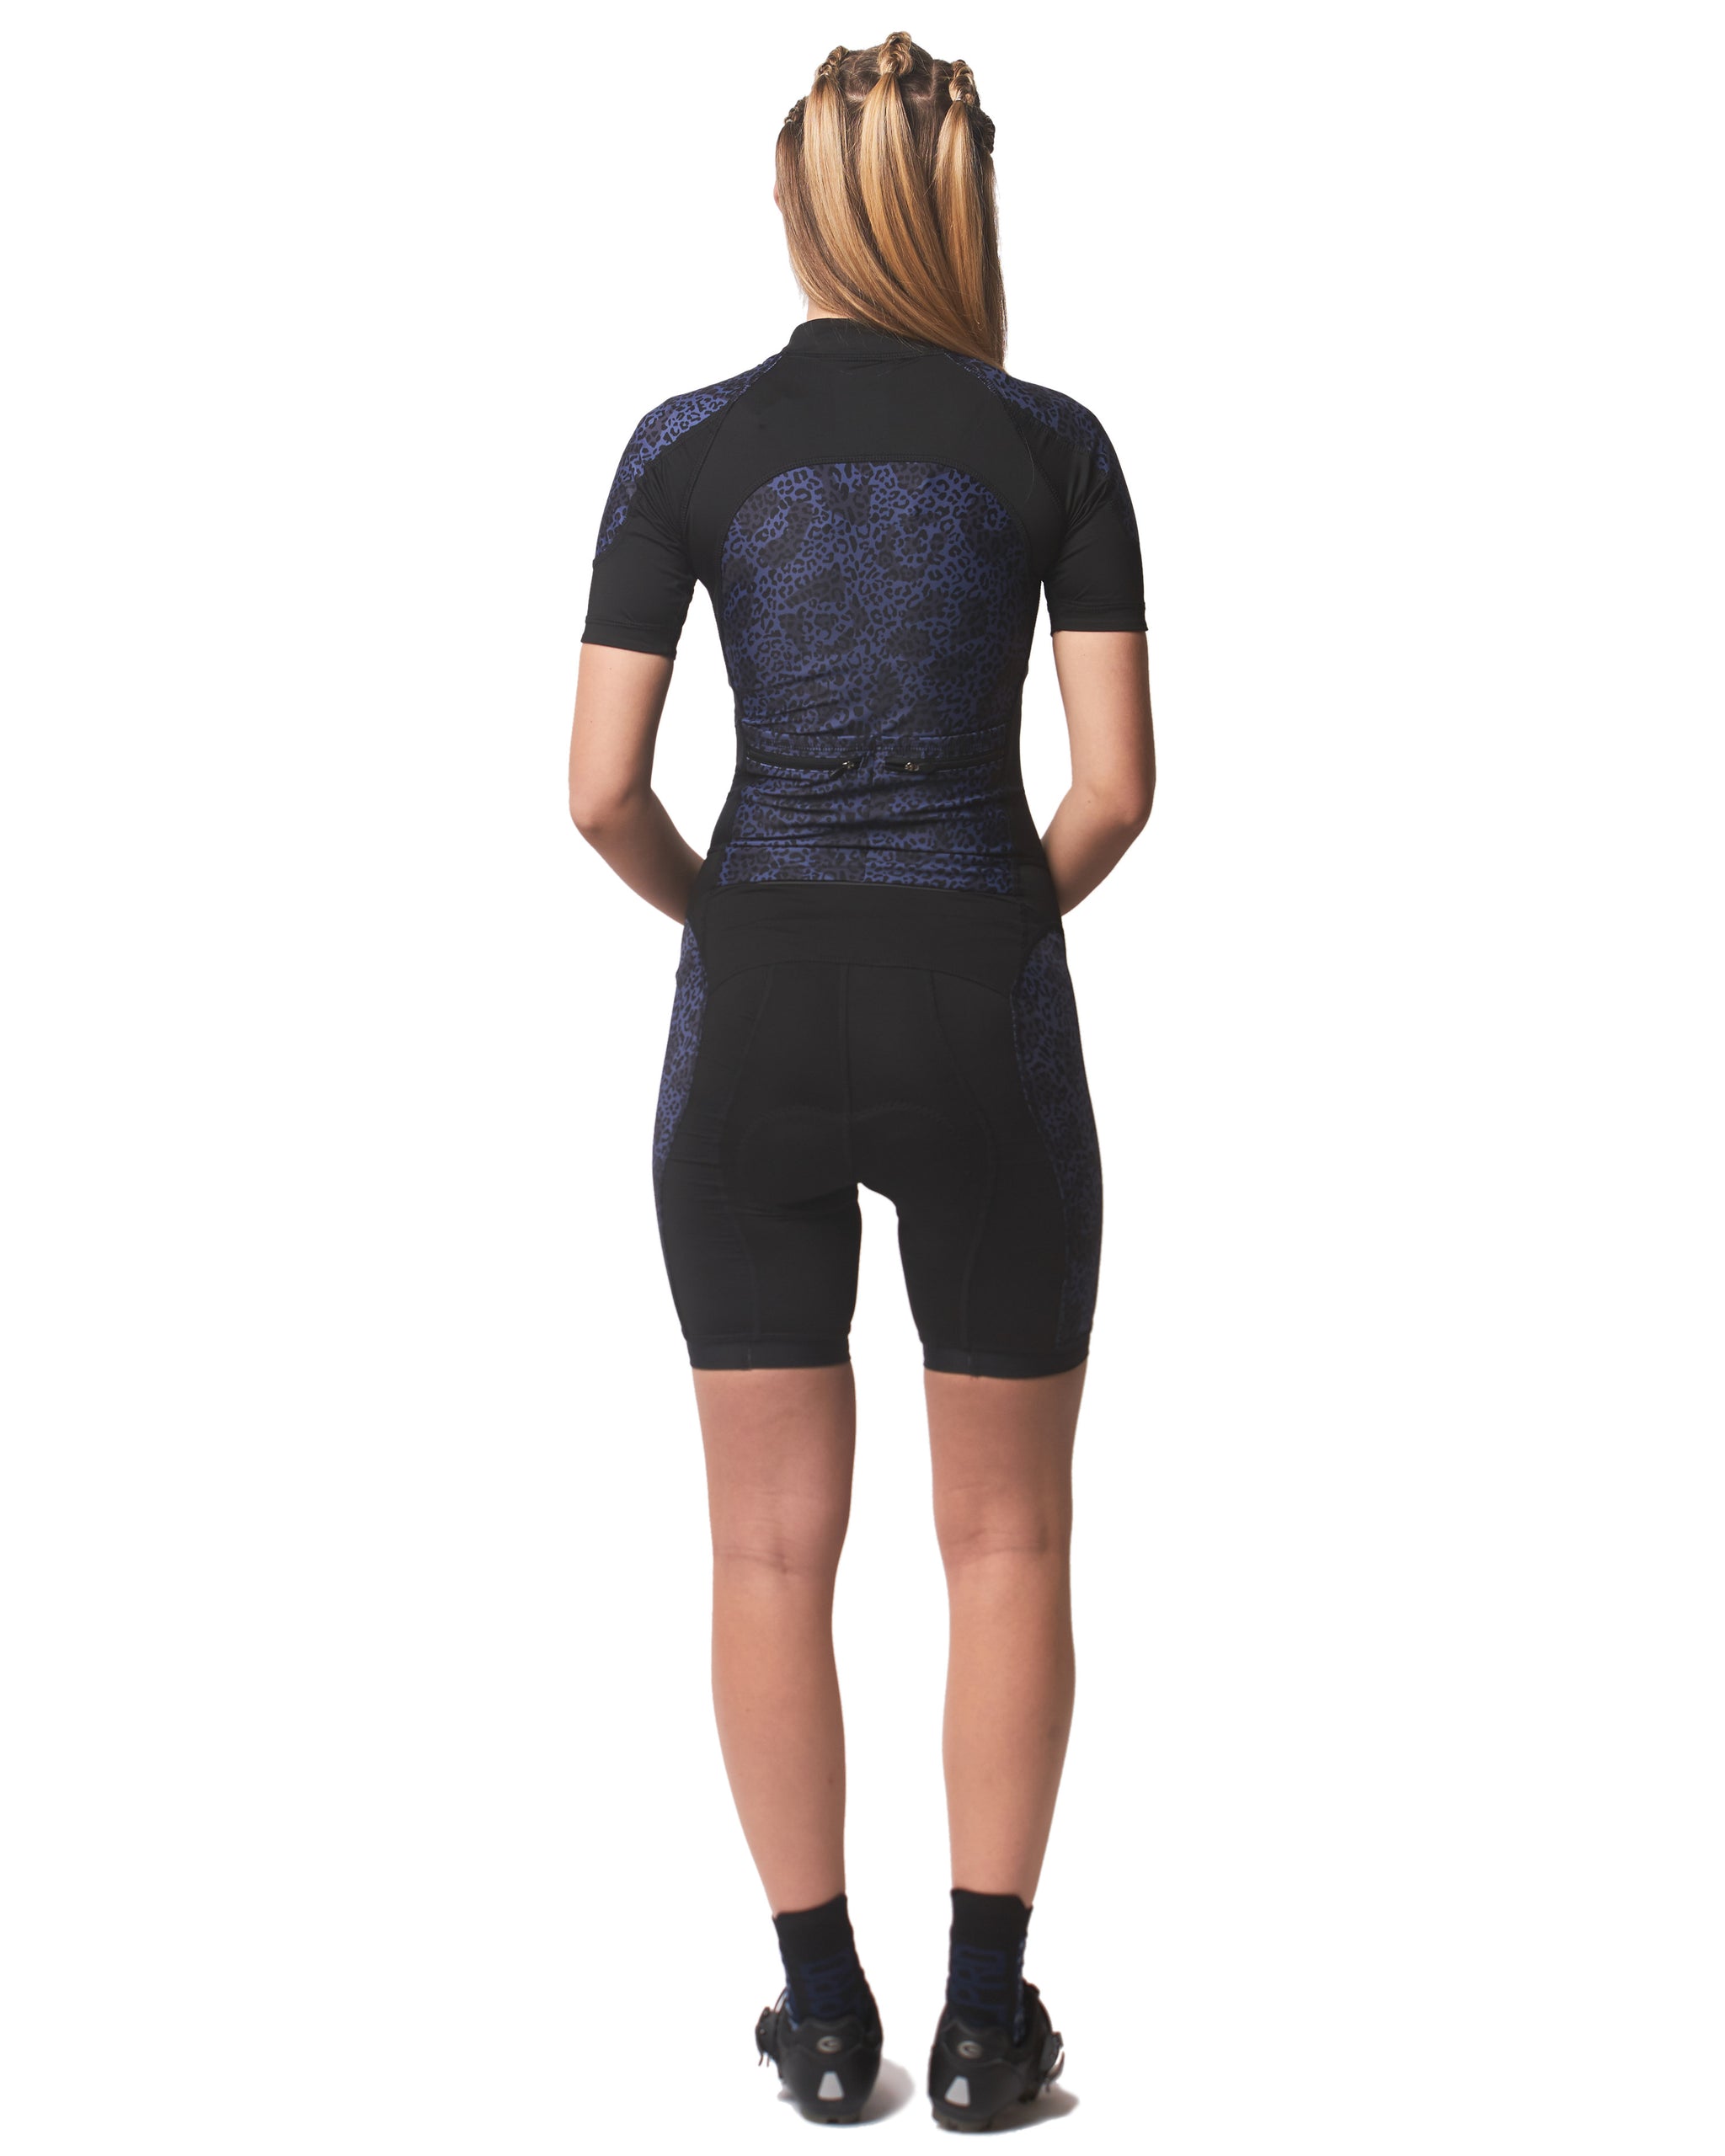 Download Cycling suit for women - Black and leopard print ...